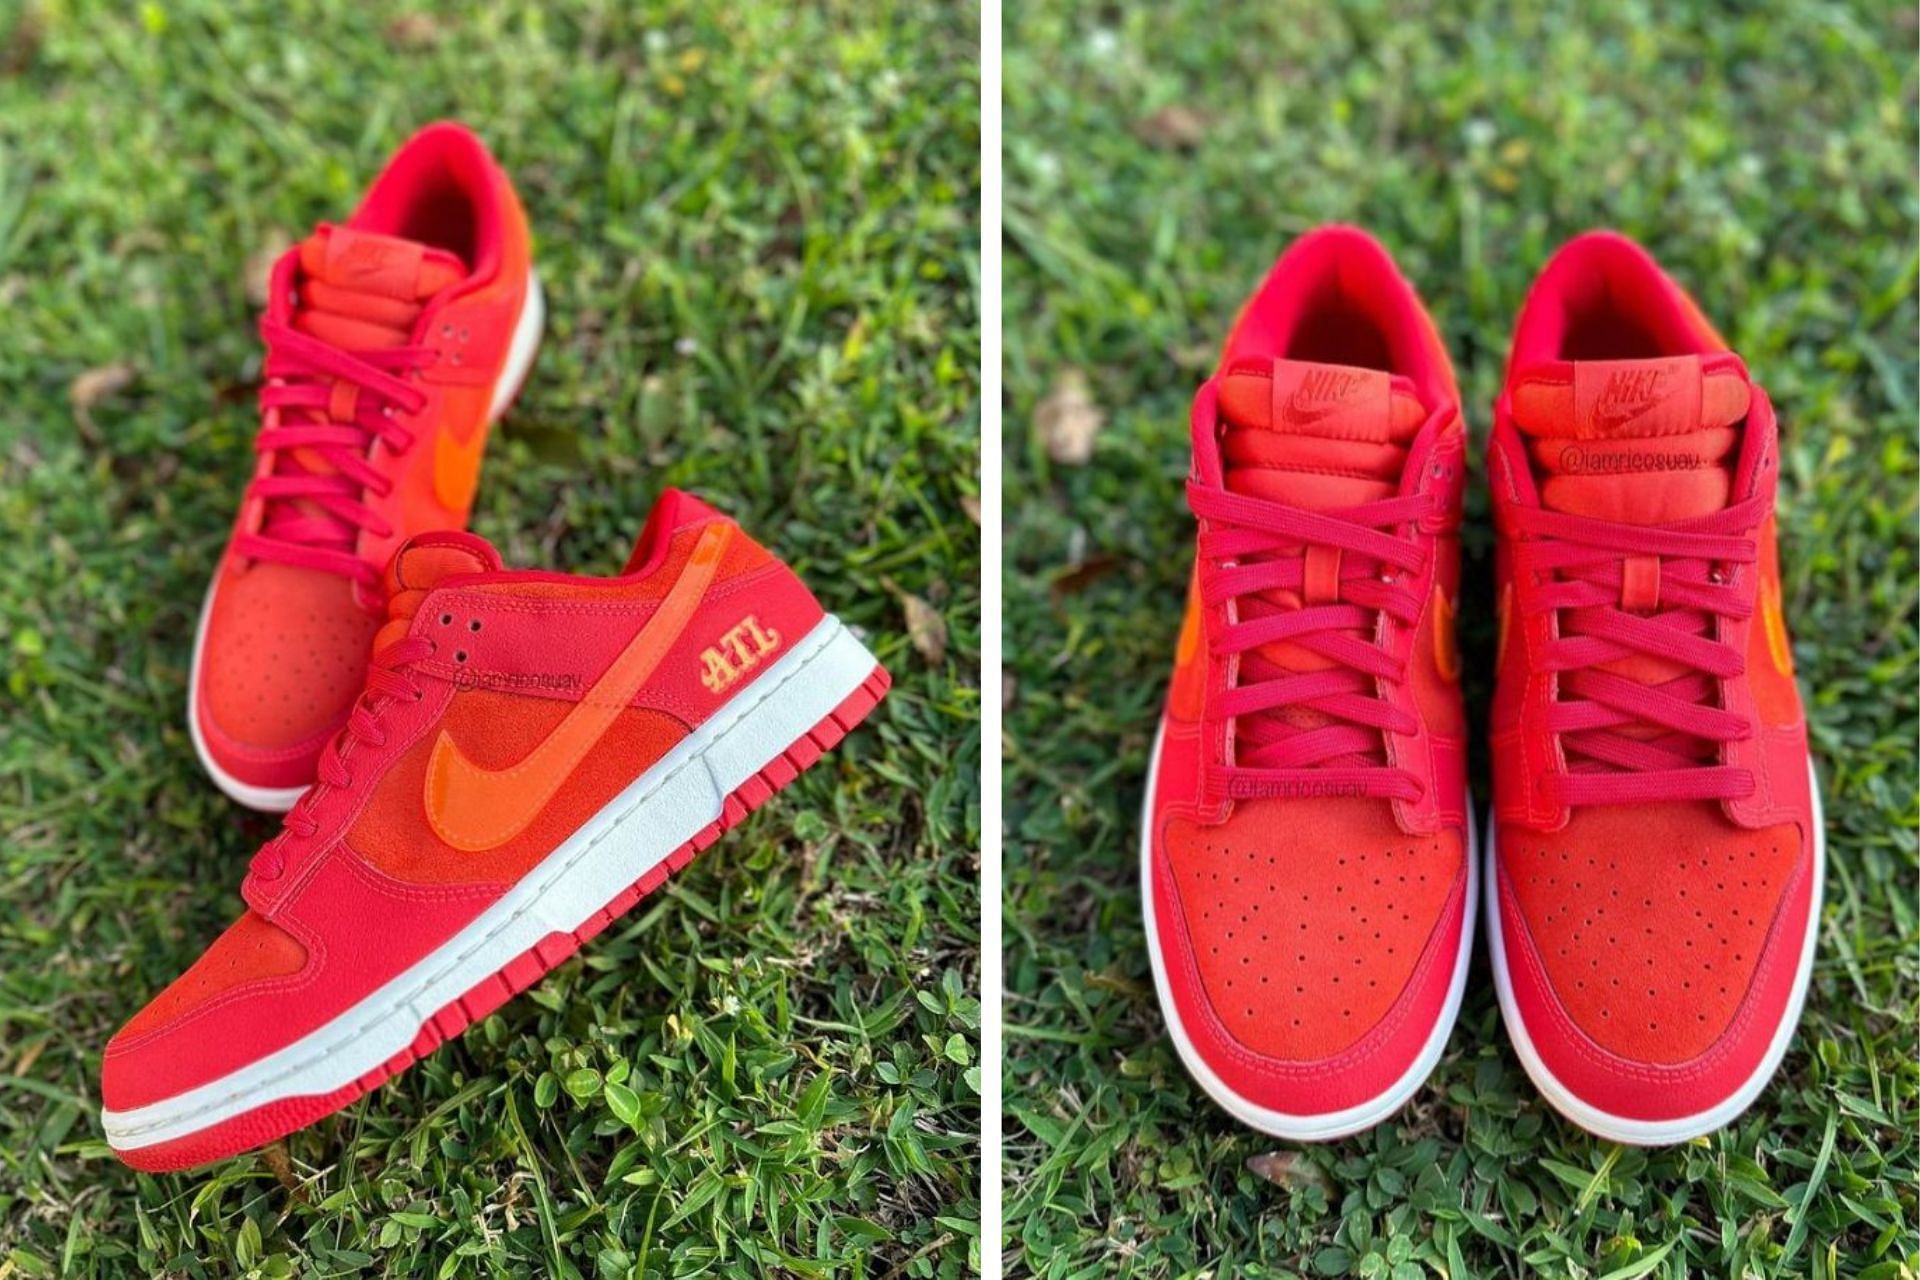 Take a closer look at the Nike Dunk Low ATL shoes (Image via Instagram/@iamricosauv)